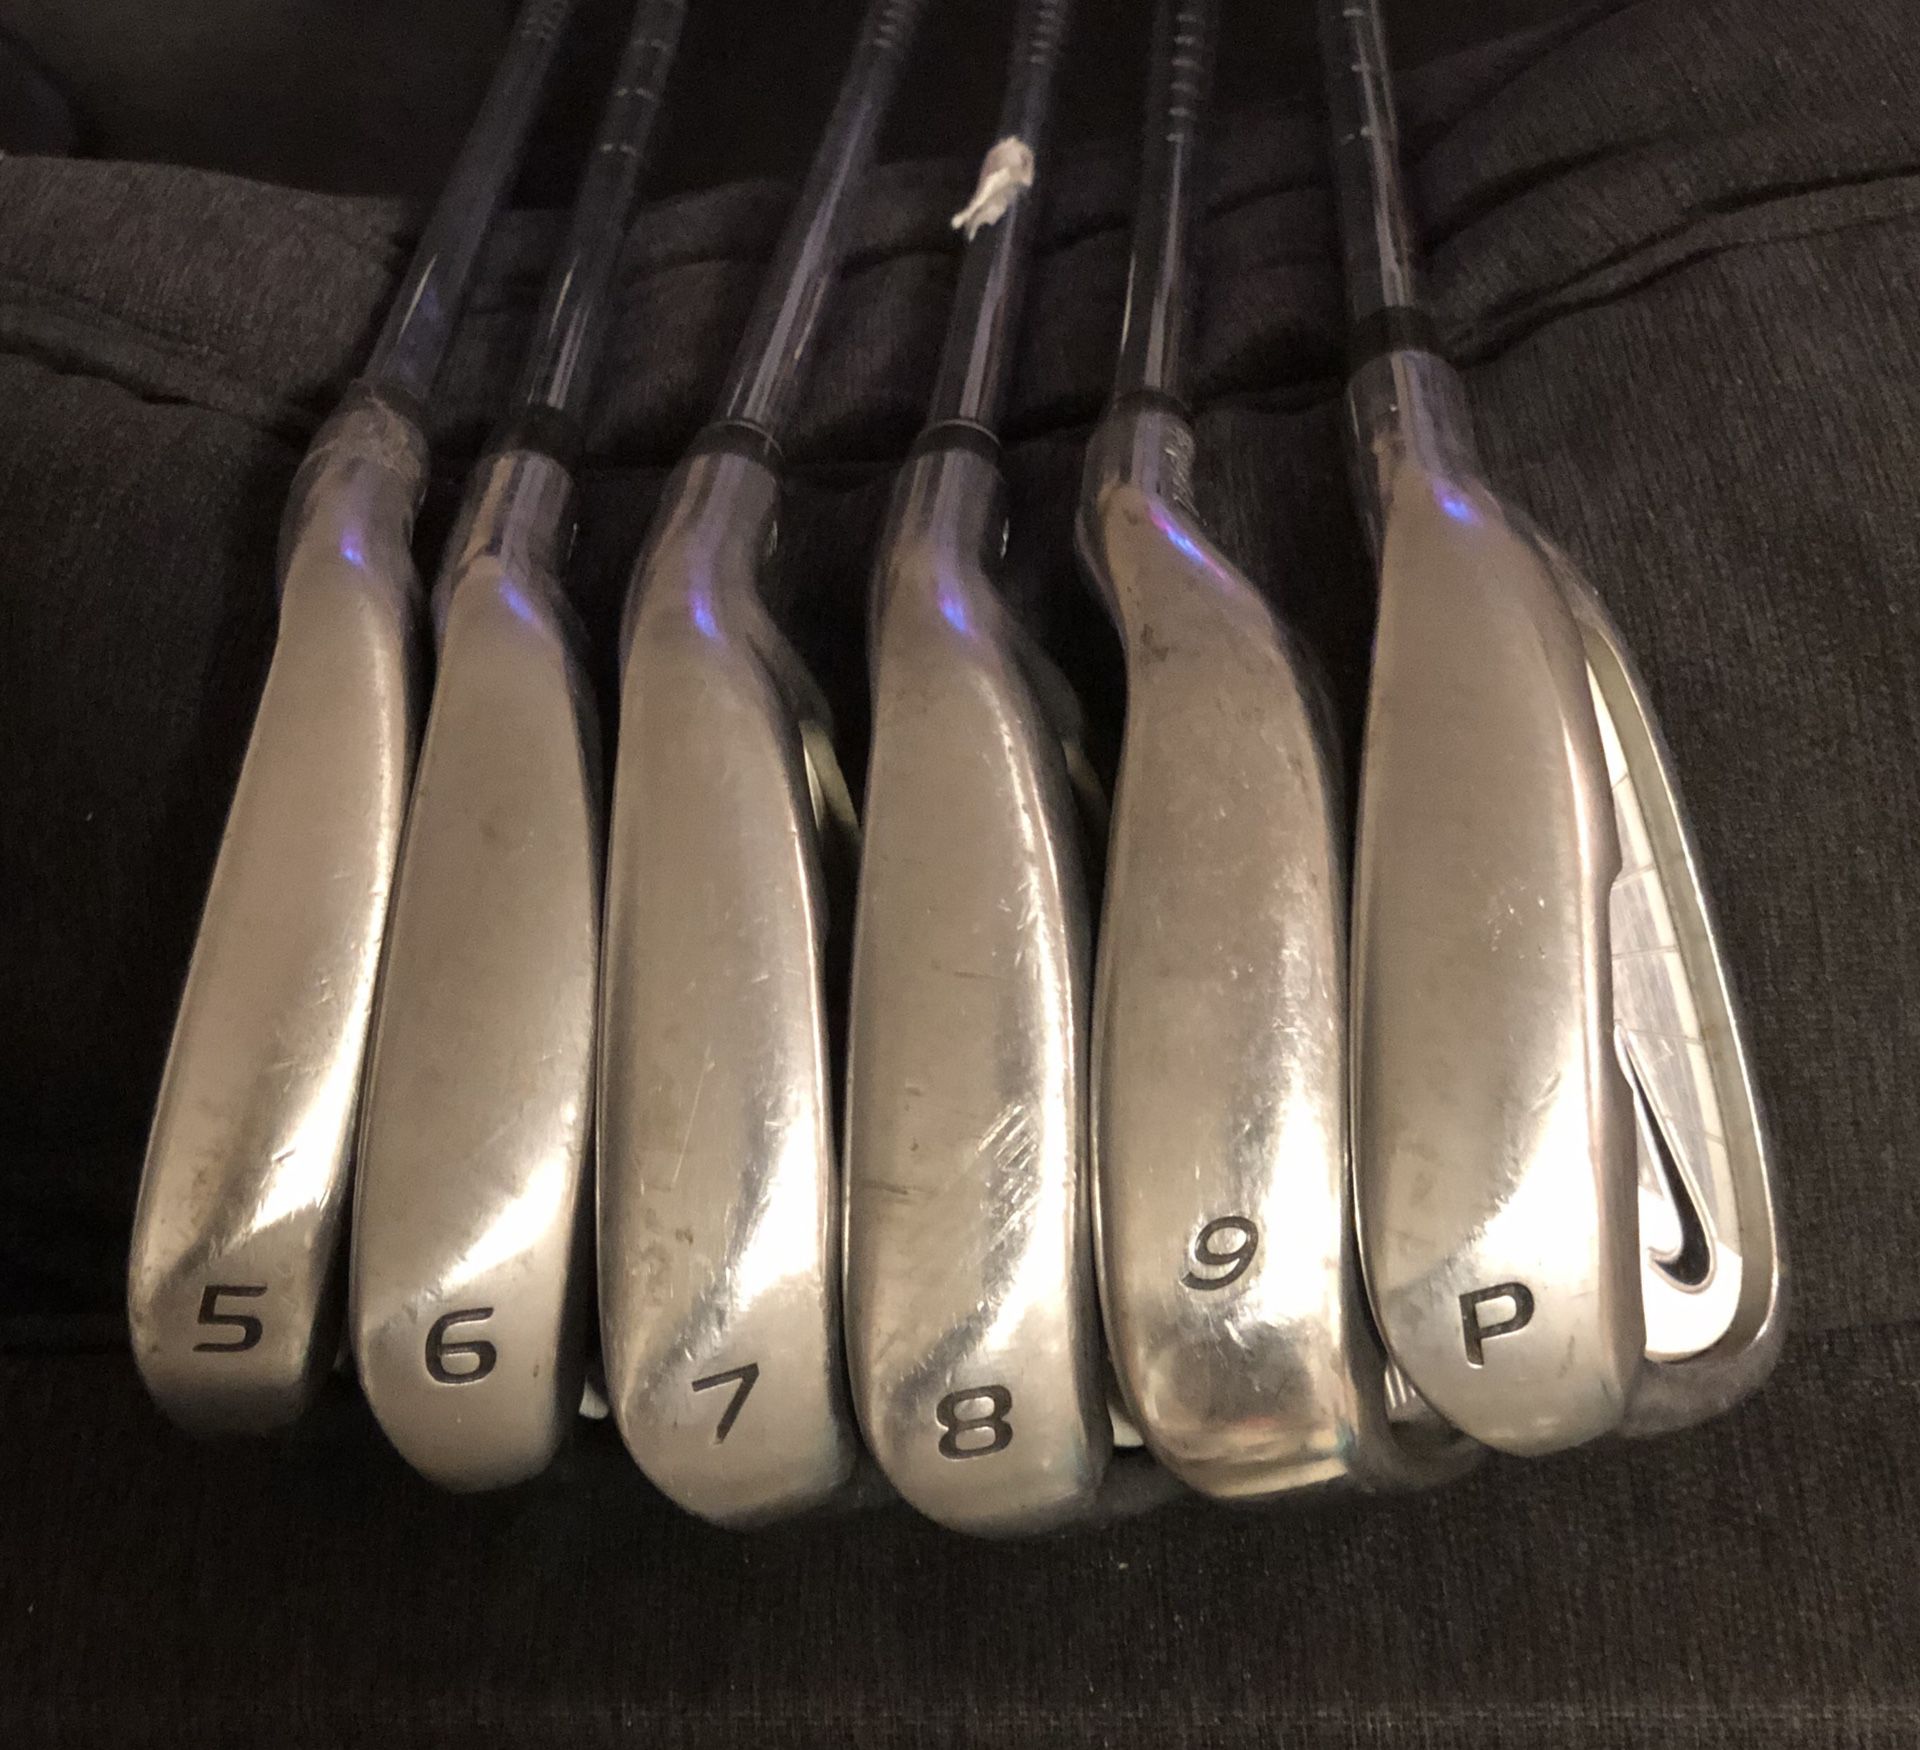 Nike Golf NDS irons 5-PW (9 iron is Taylormade)